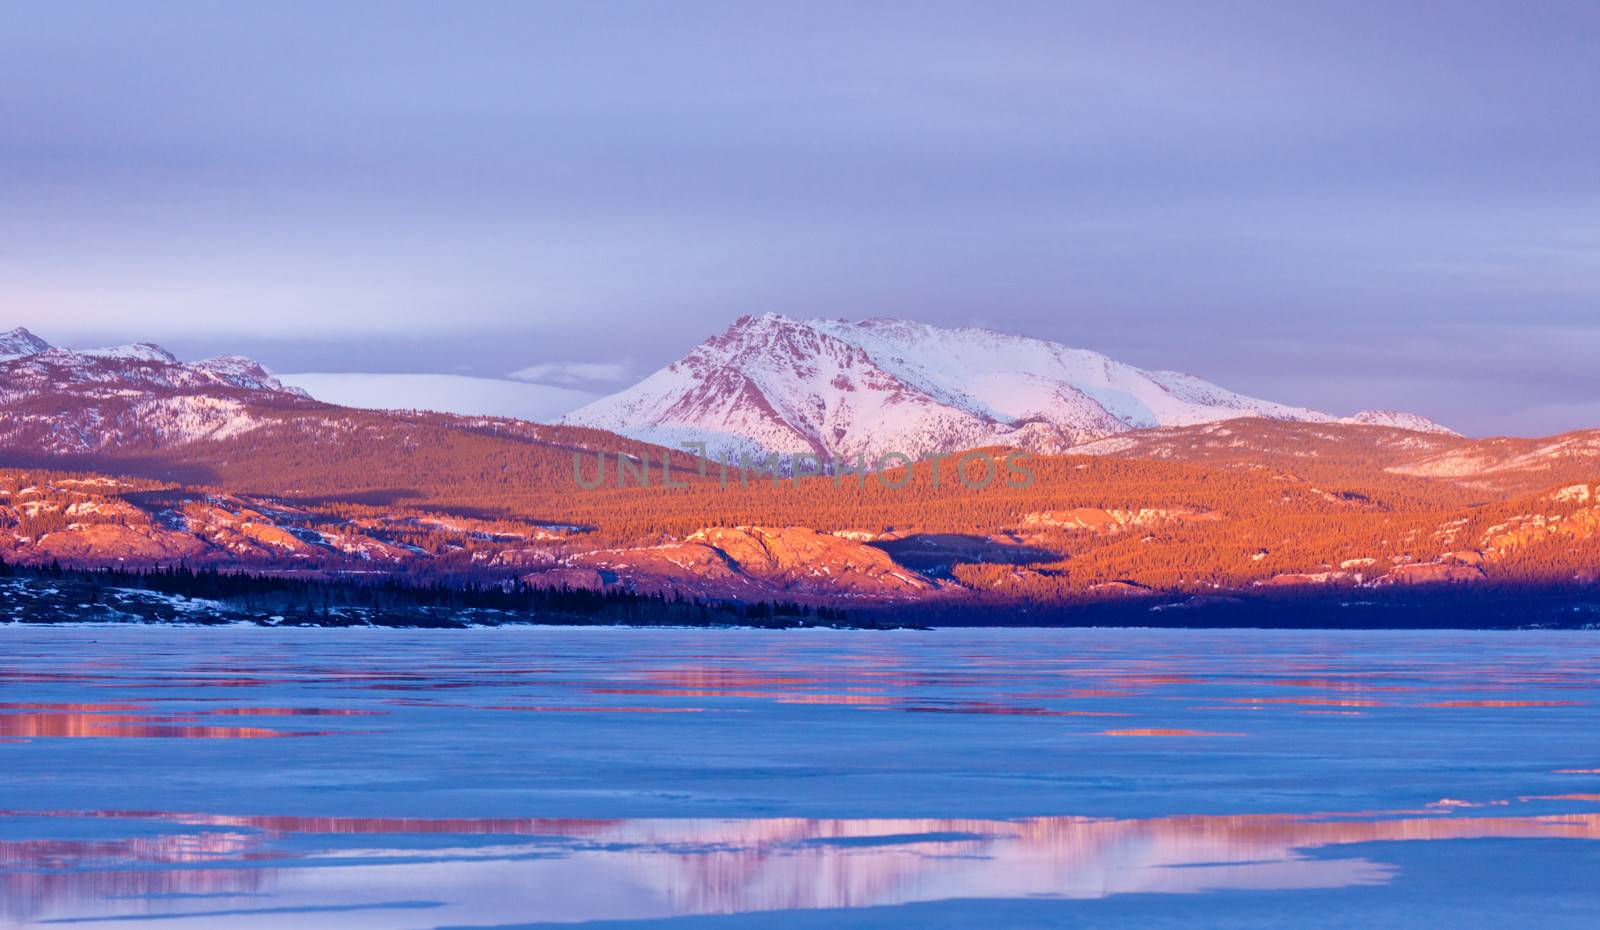 Snowy Mt Laurier frozen Lake Laberge Yukon Canada by PiLens